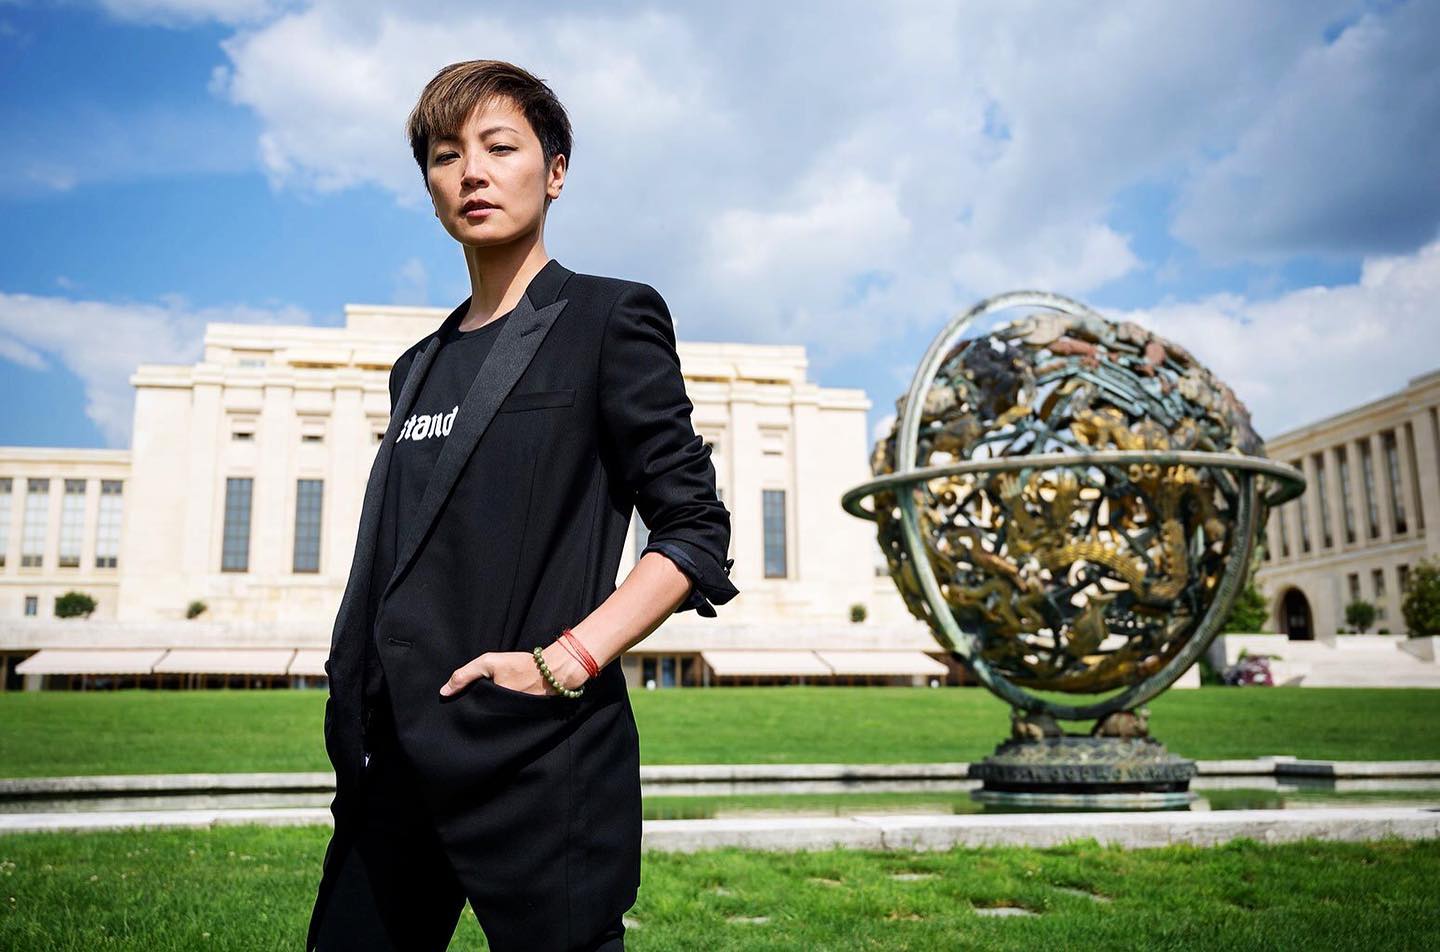 Cantopop star Denise Ho stands in front of the UN rights council headquarters in Geneva, where she gave a speech on July 9. Photo via Facebook.